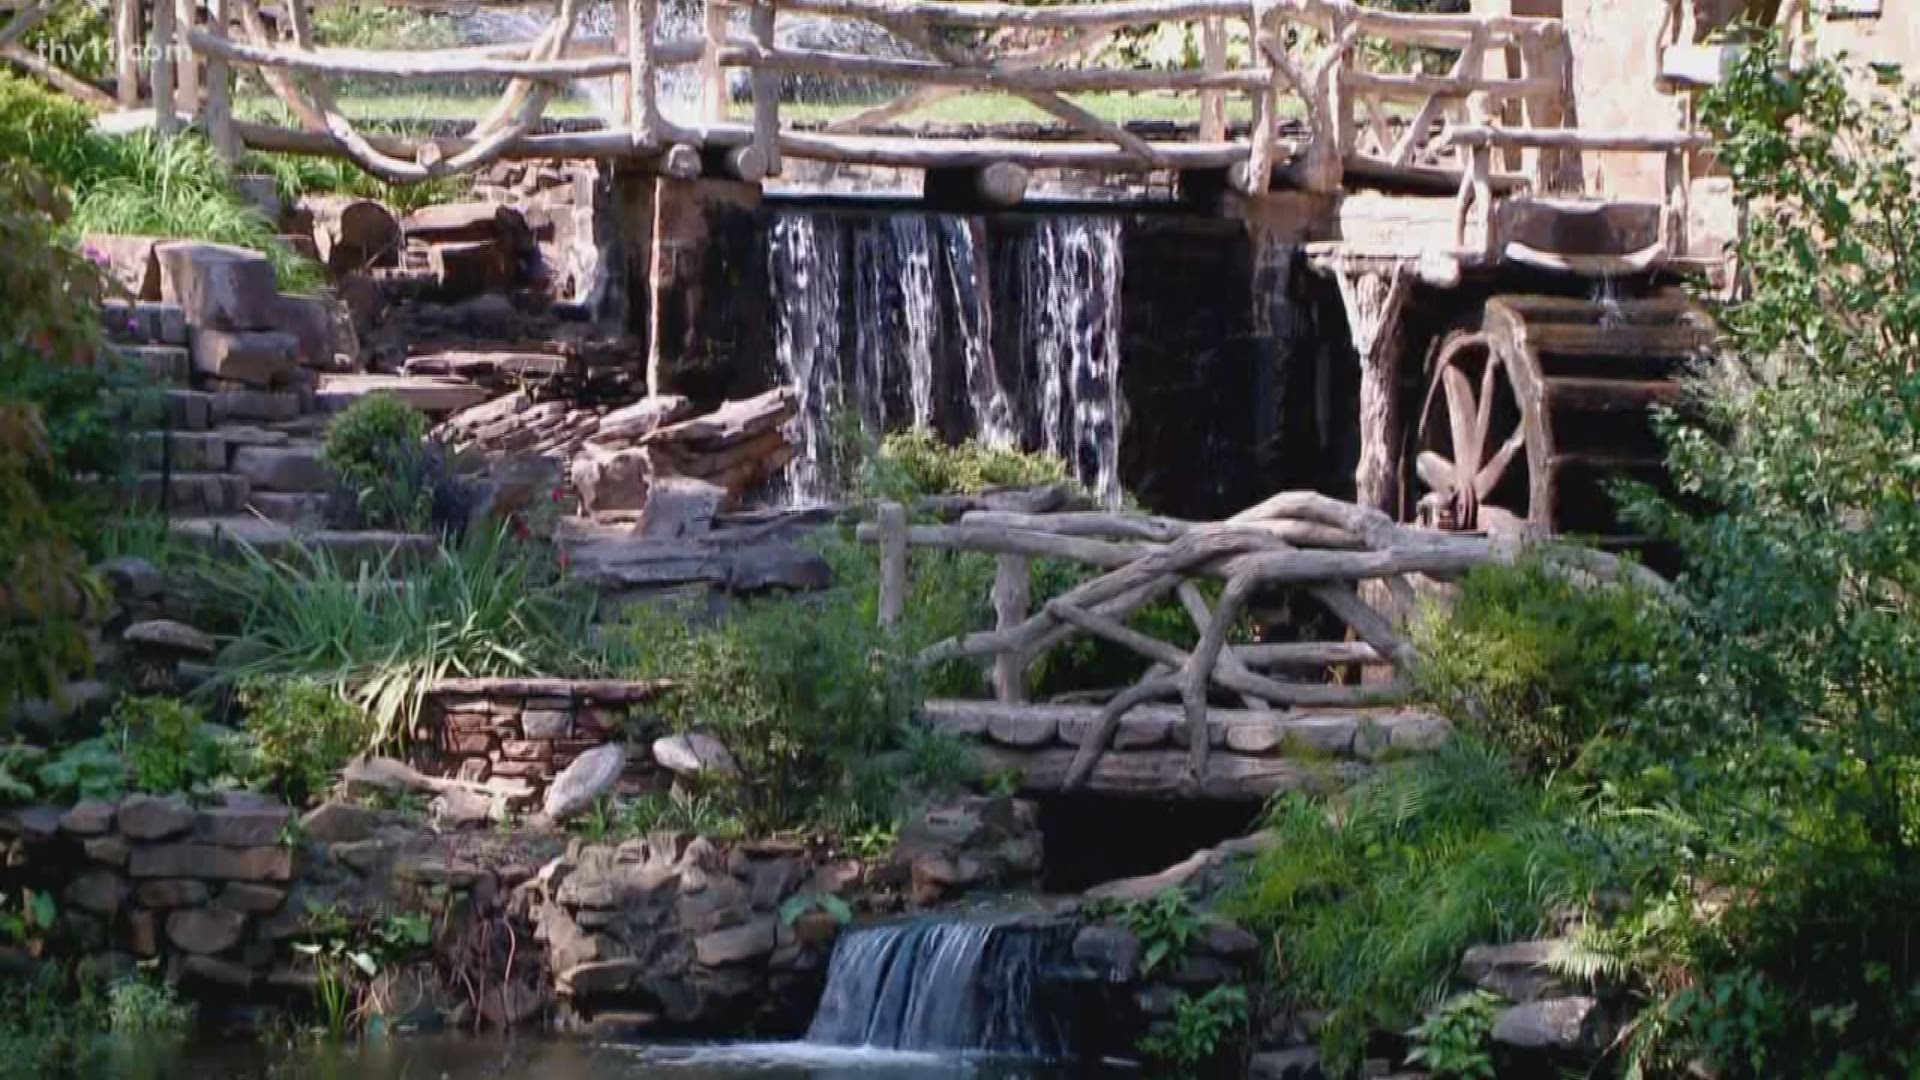 The Old Mill in North Little Rock took a step toward being back open to visitors, as workers began installing new piping and energy-saving power supplies for the waterfall.